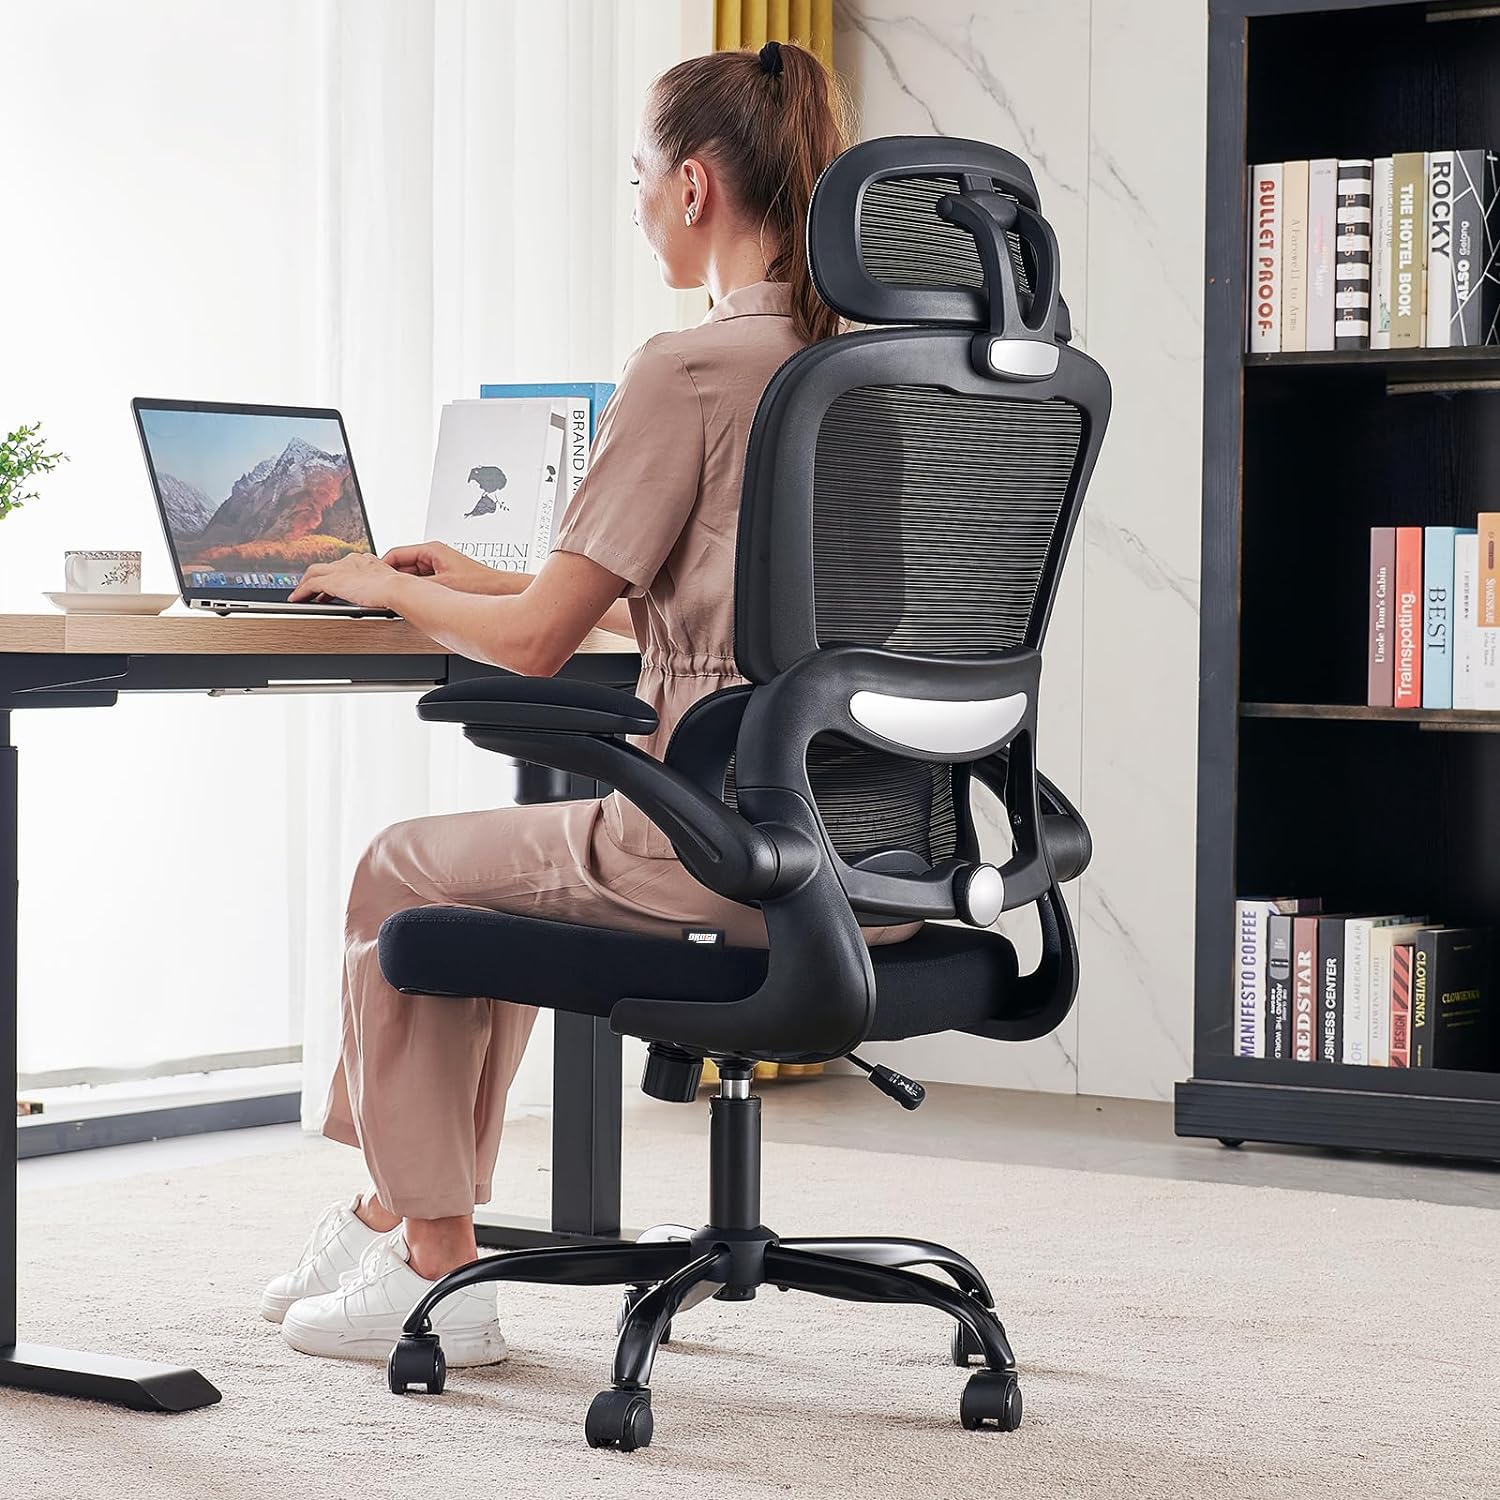 Drogo AeroFlex Ergonomic Office Chair for Work from Home, High Back Computer Chair with Adjustable Seat